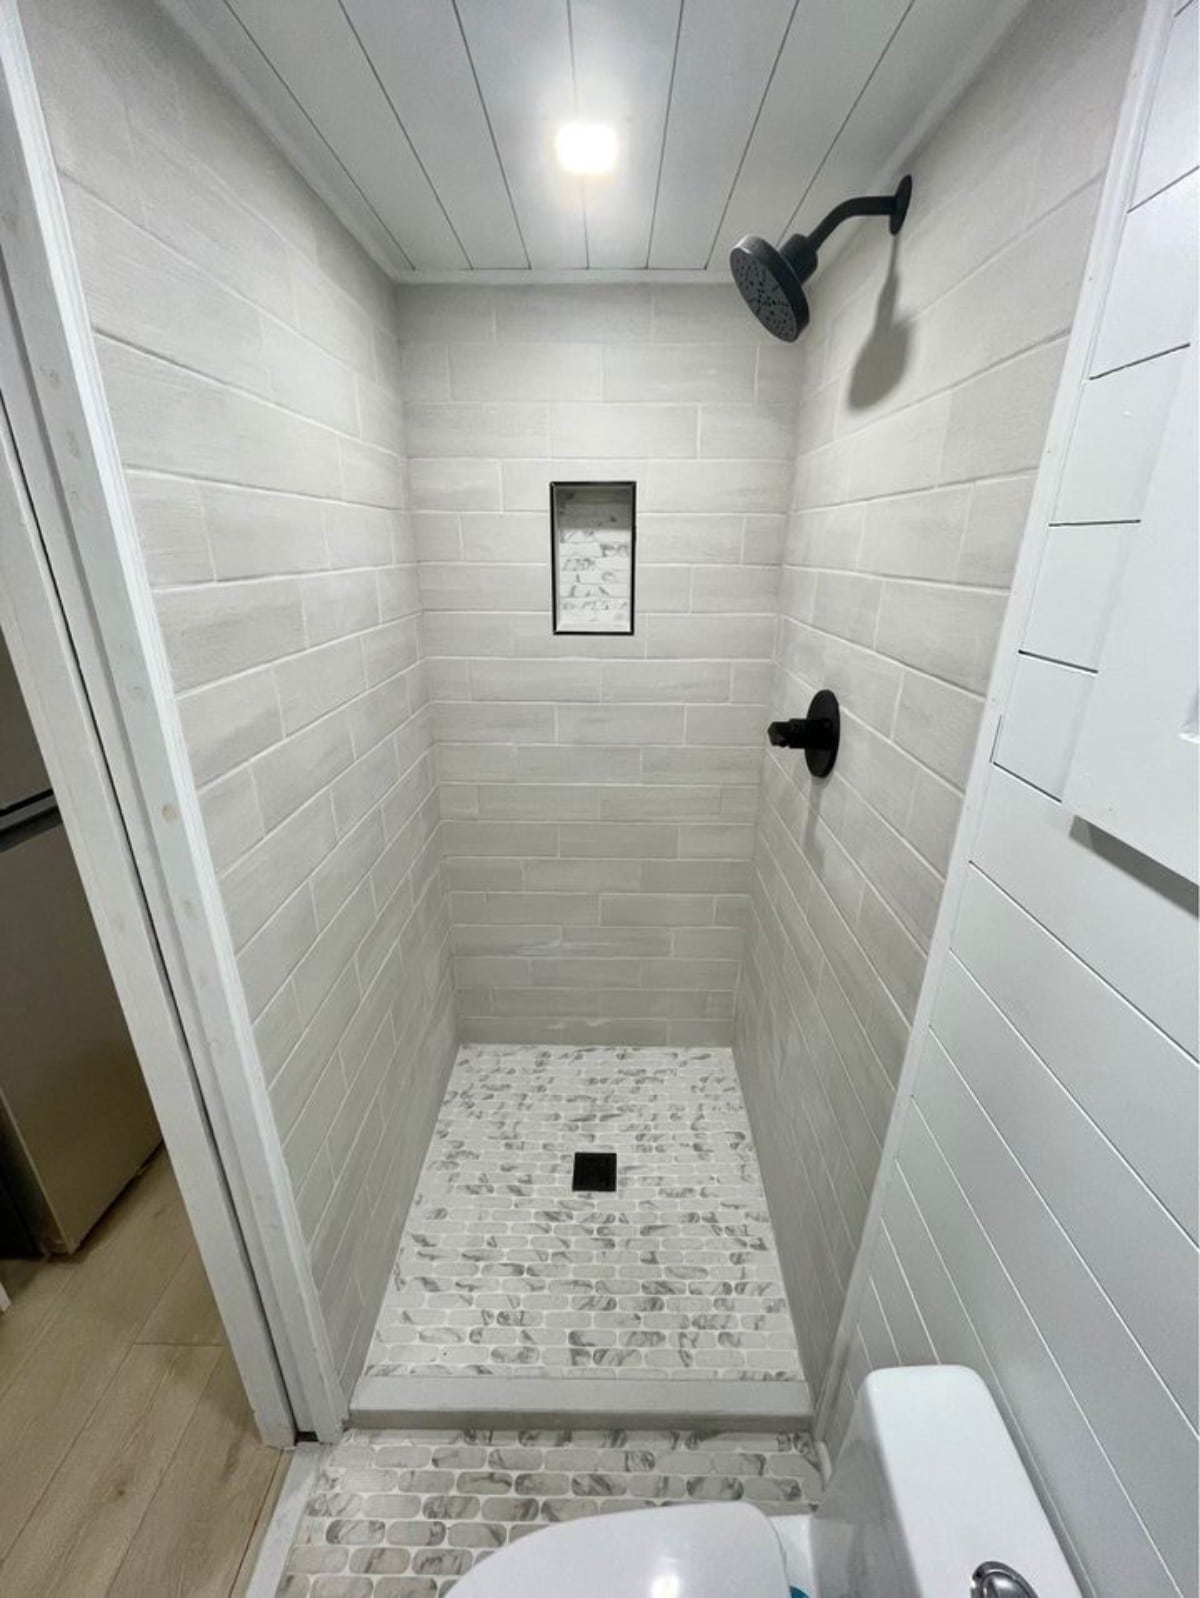 Super stylish bathroom has shower area, a standard toilet and water heater